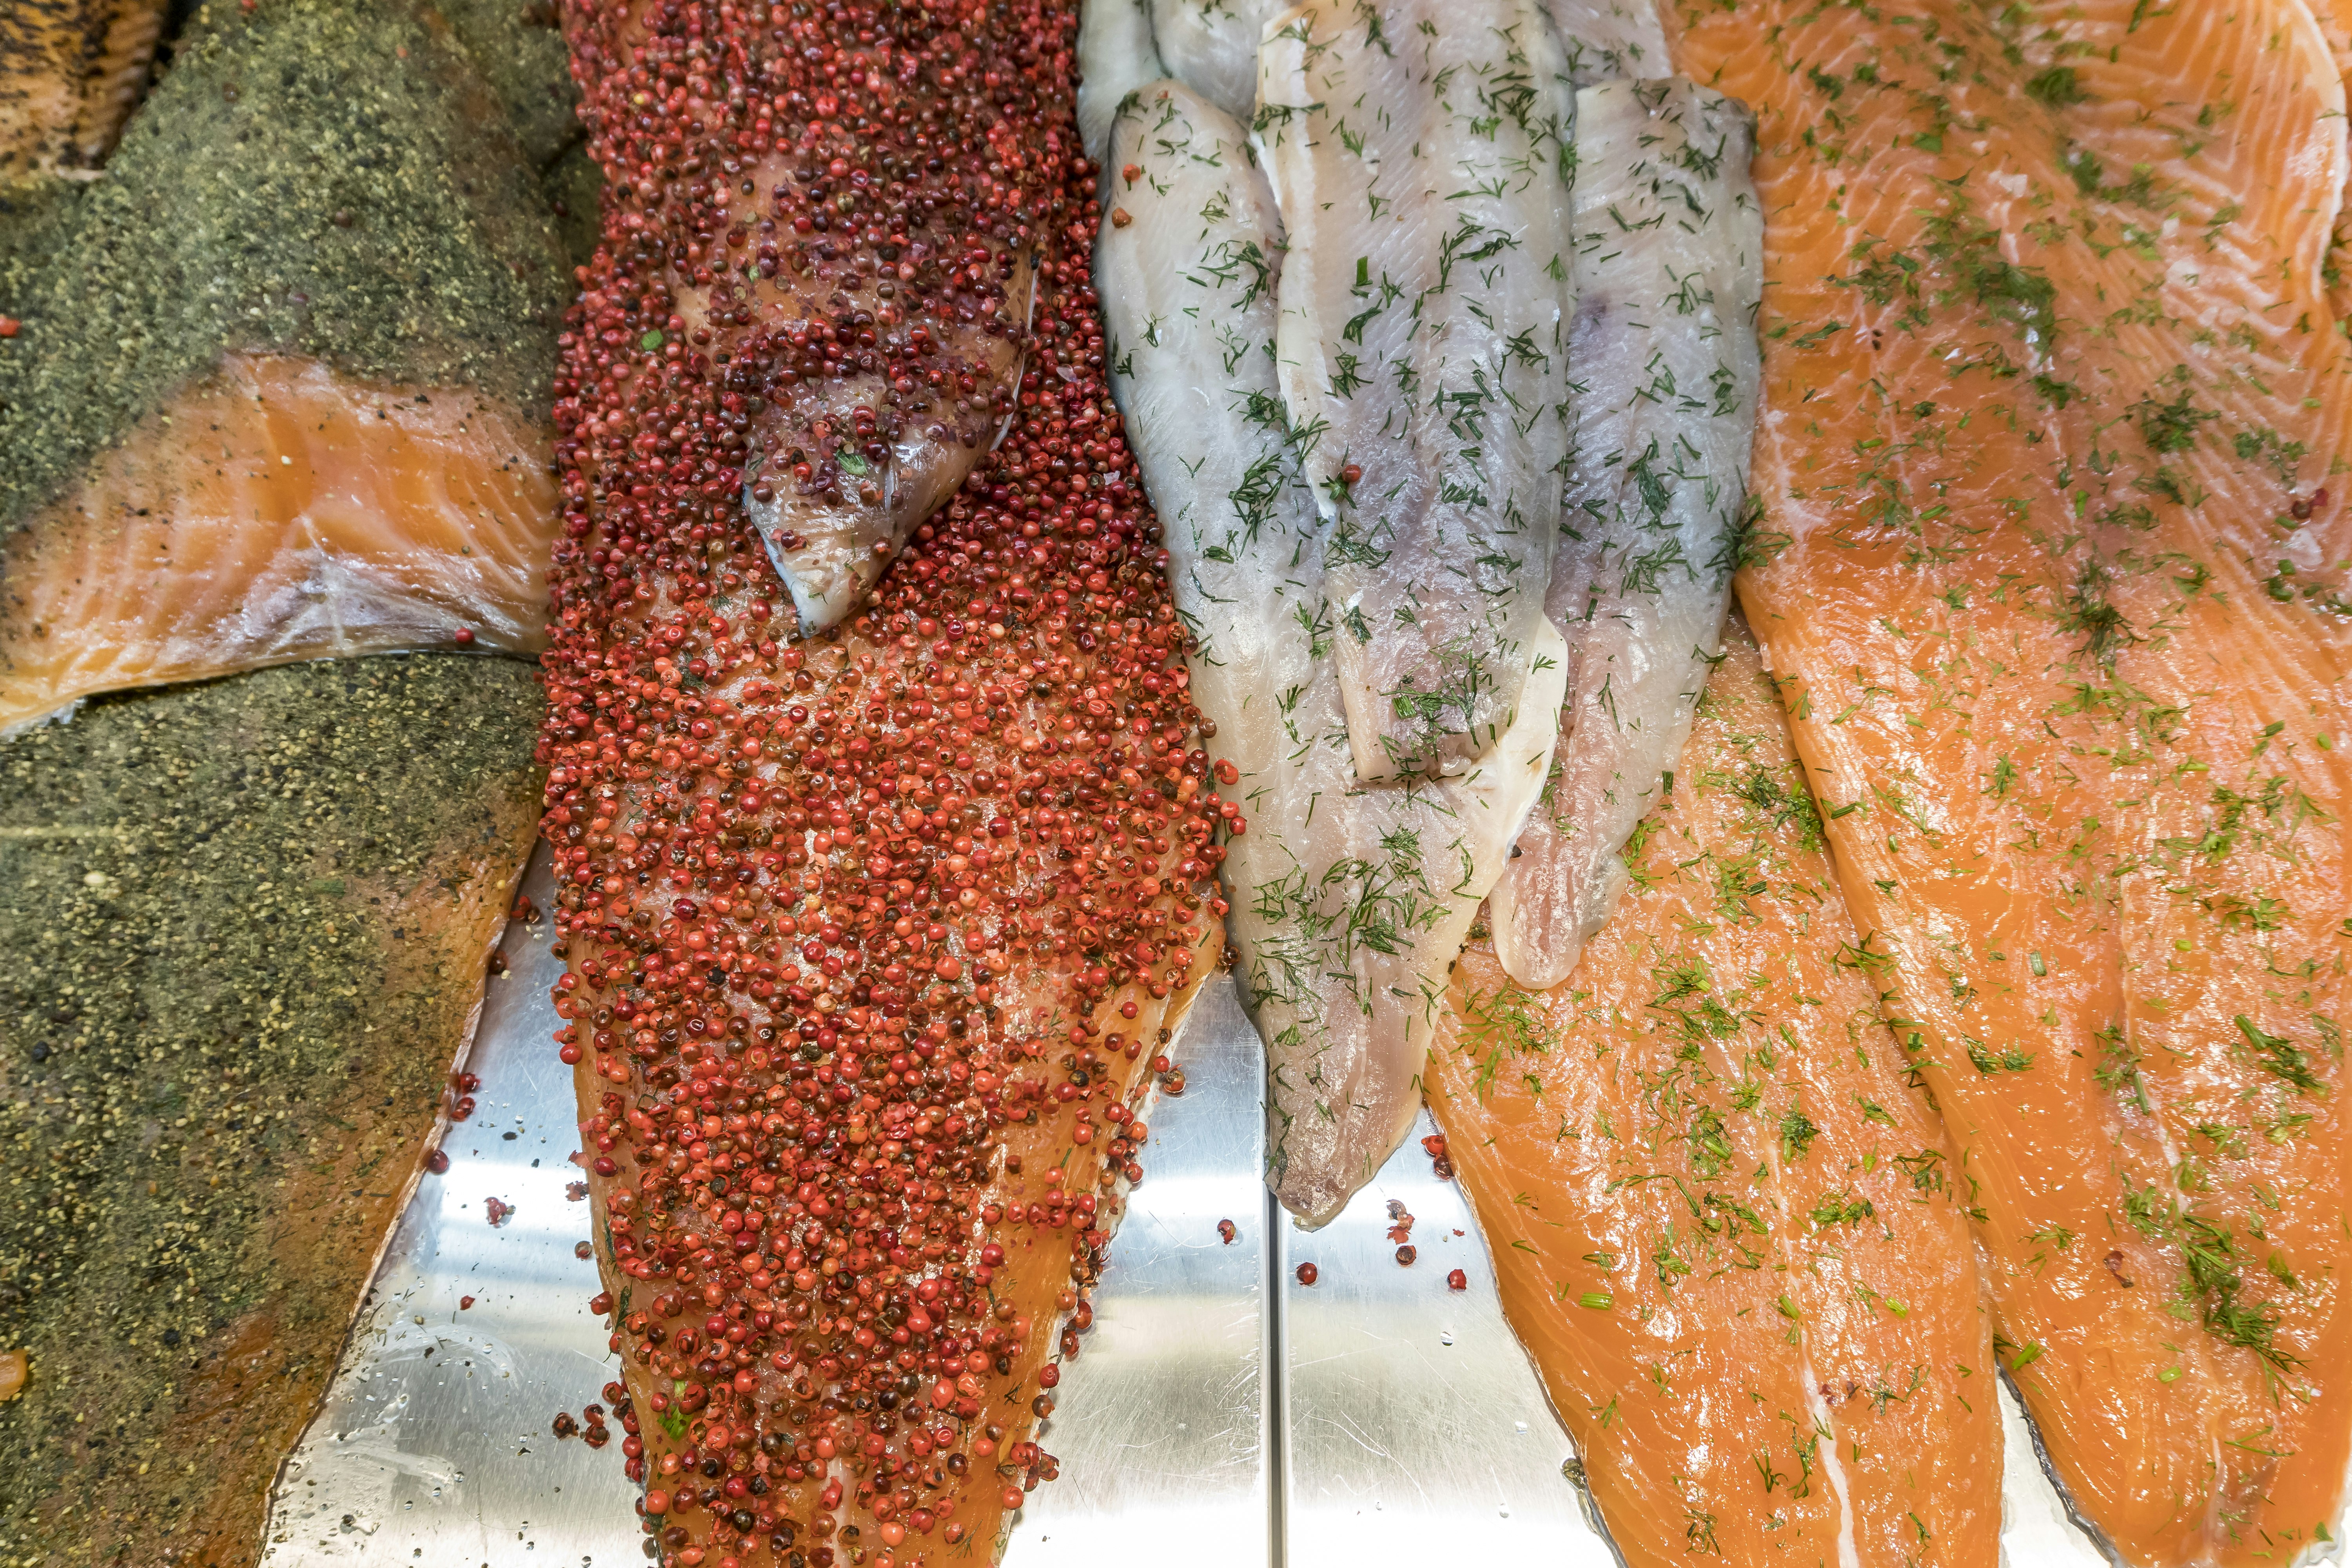 Several fillets of fish have been coated with different colorful herbs and spices at Vanha Kauppahalli in Helsinki.